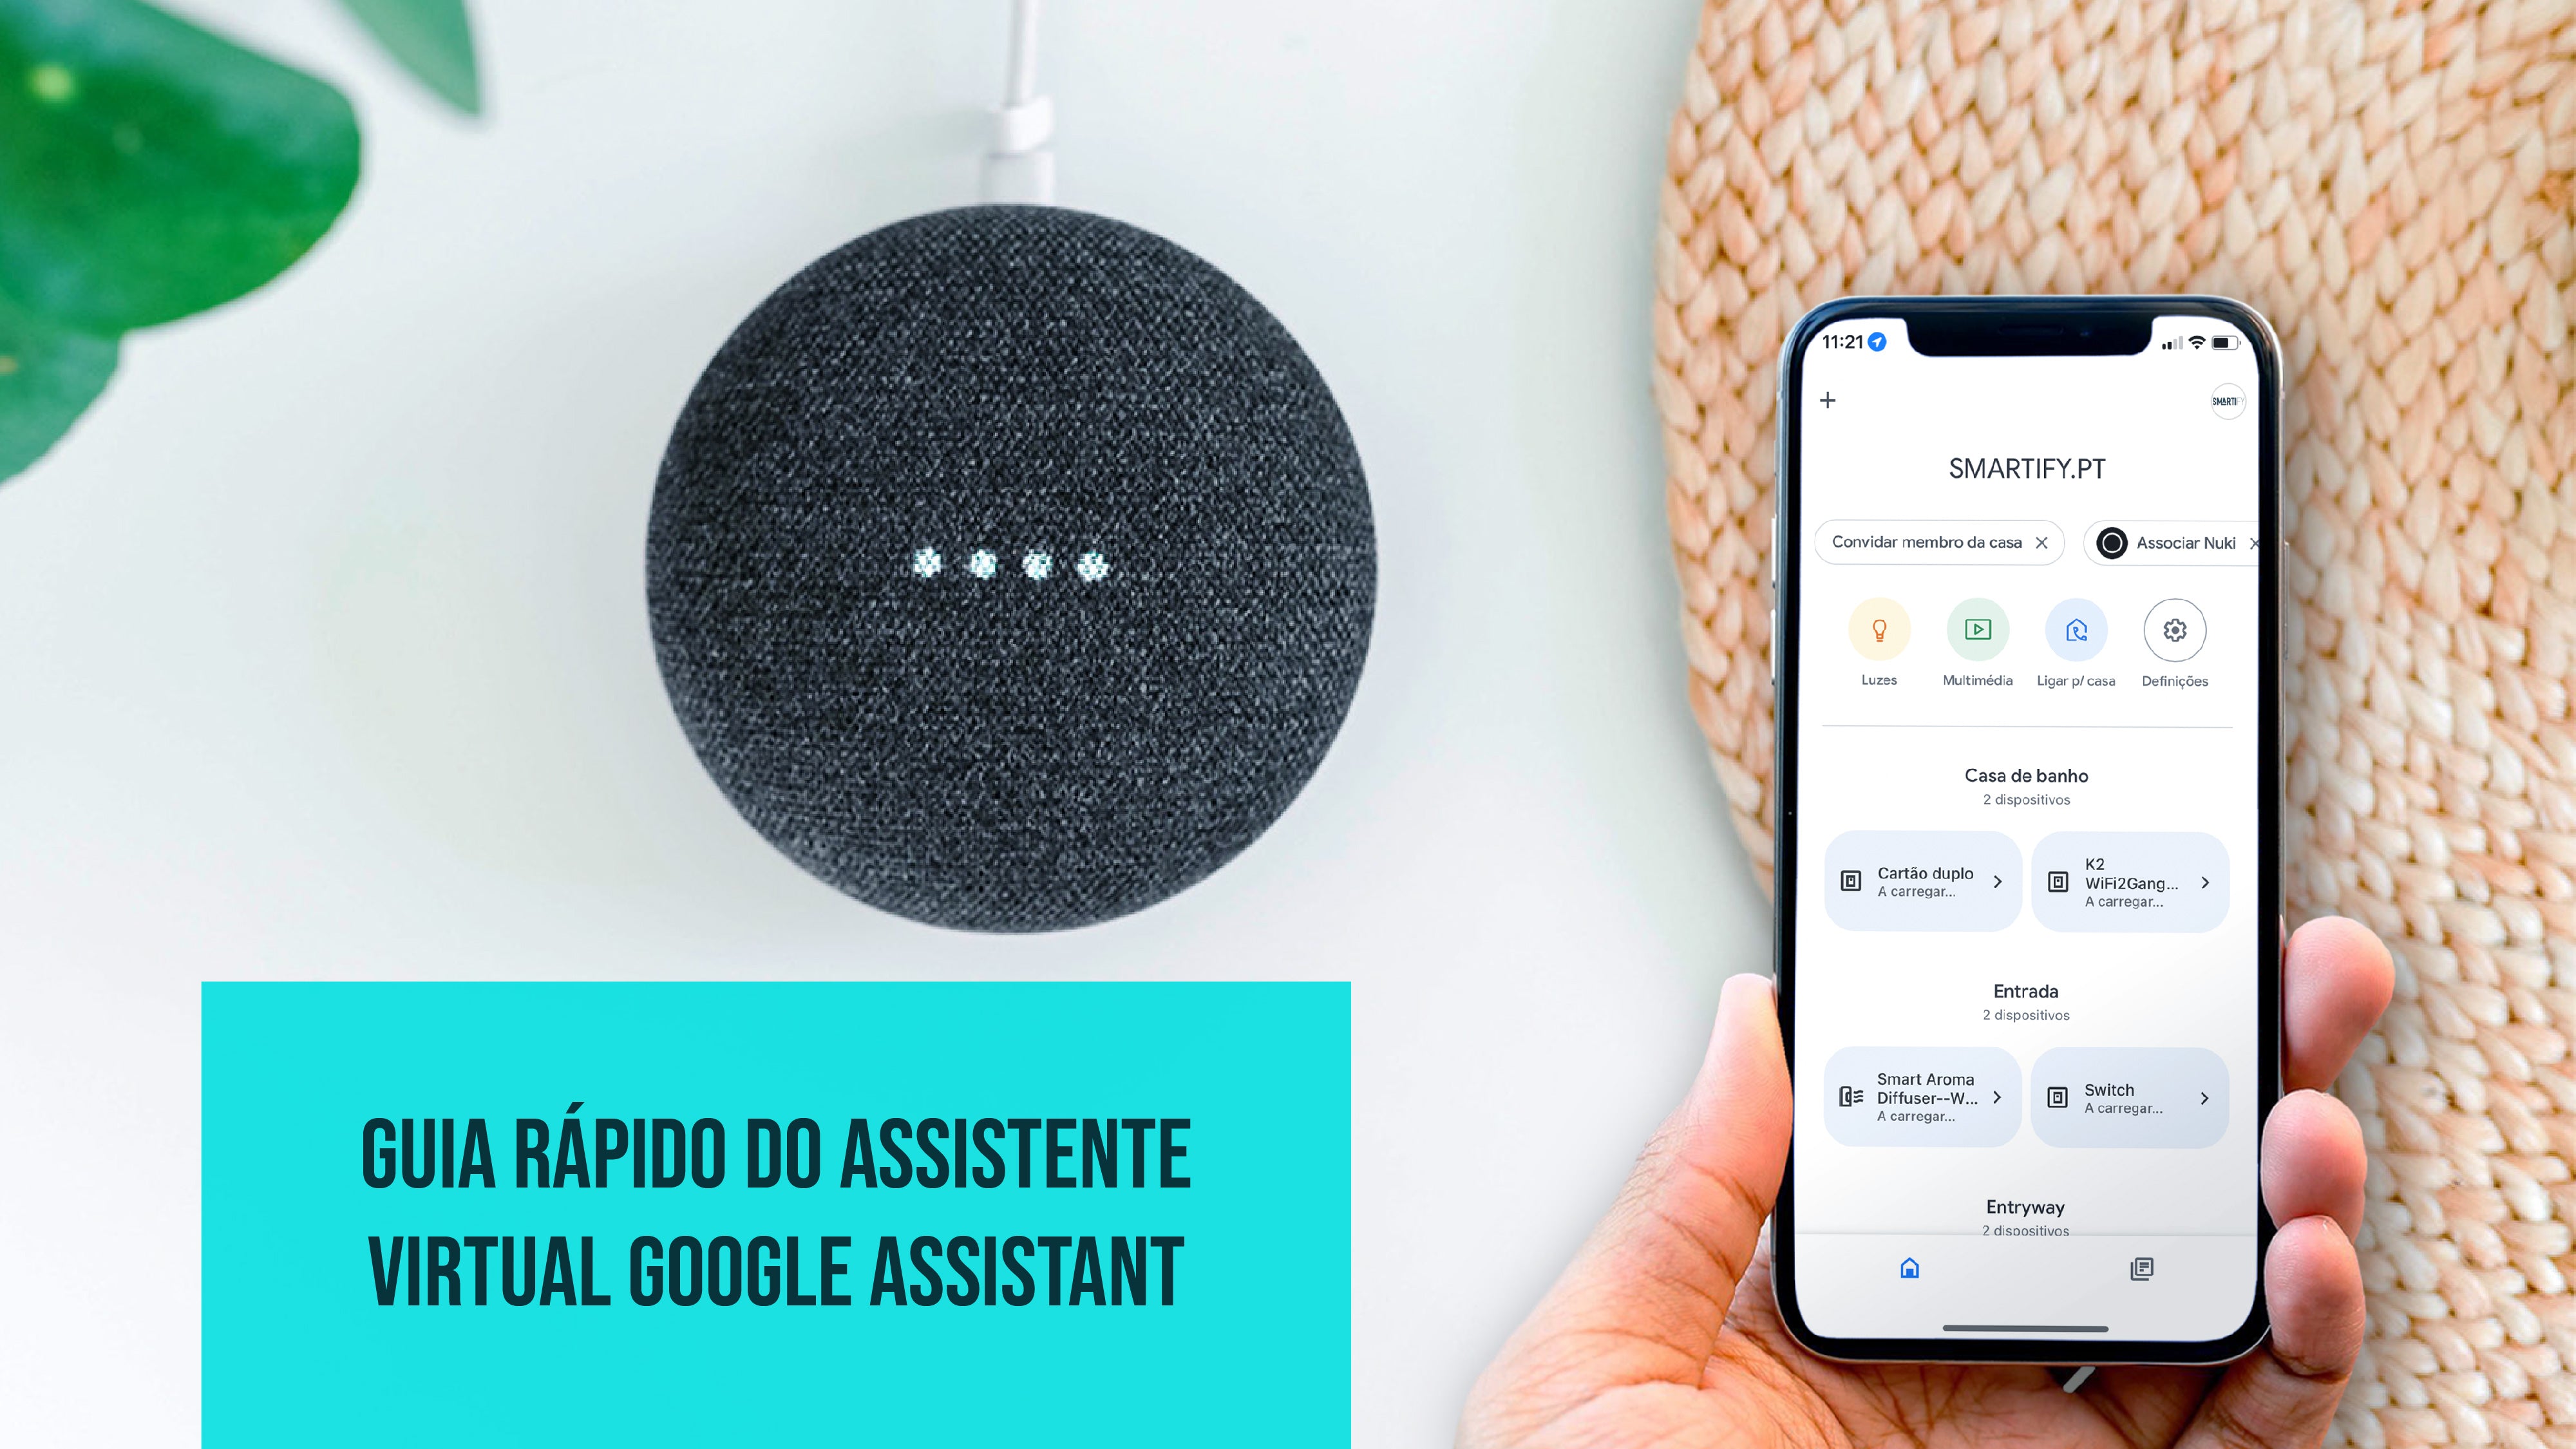 Discover the Possibilities of Google Assistant: The Virtual Assistant